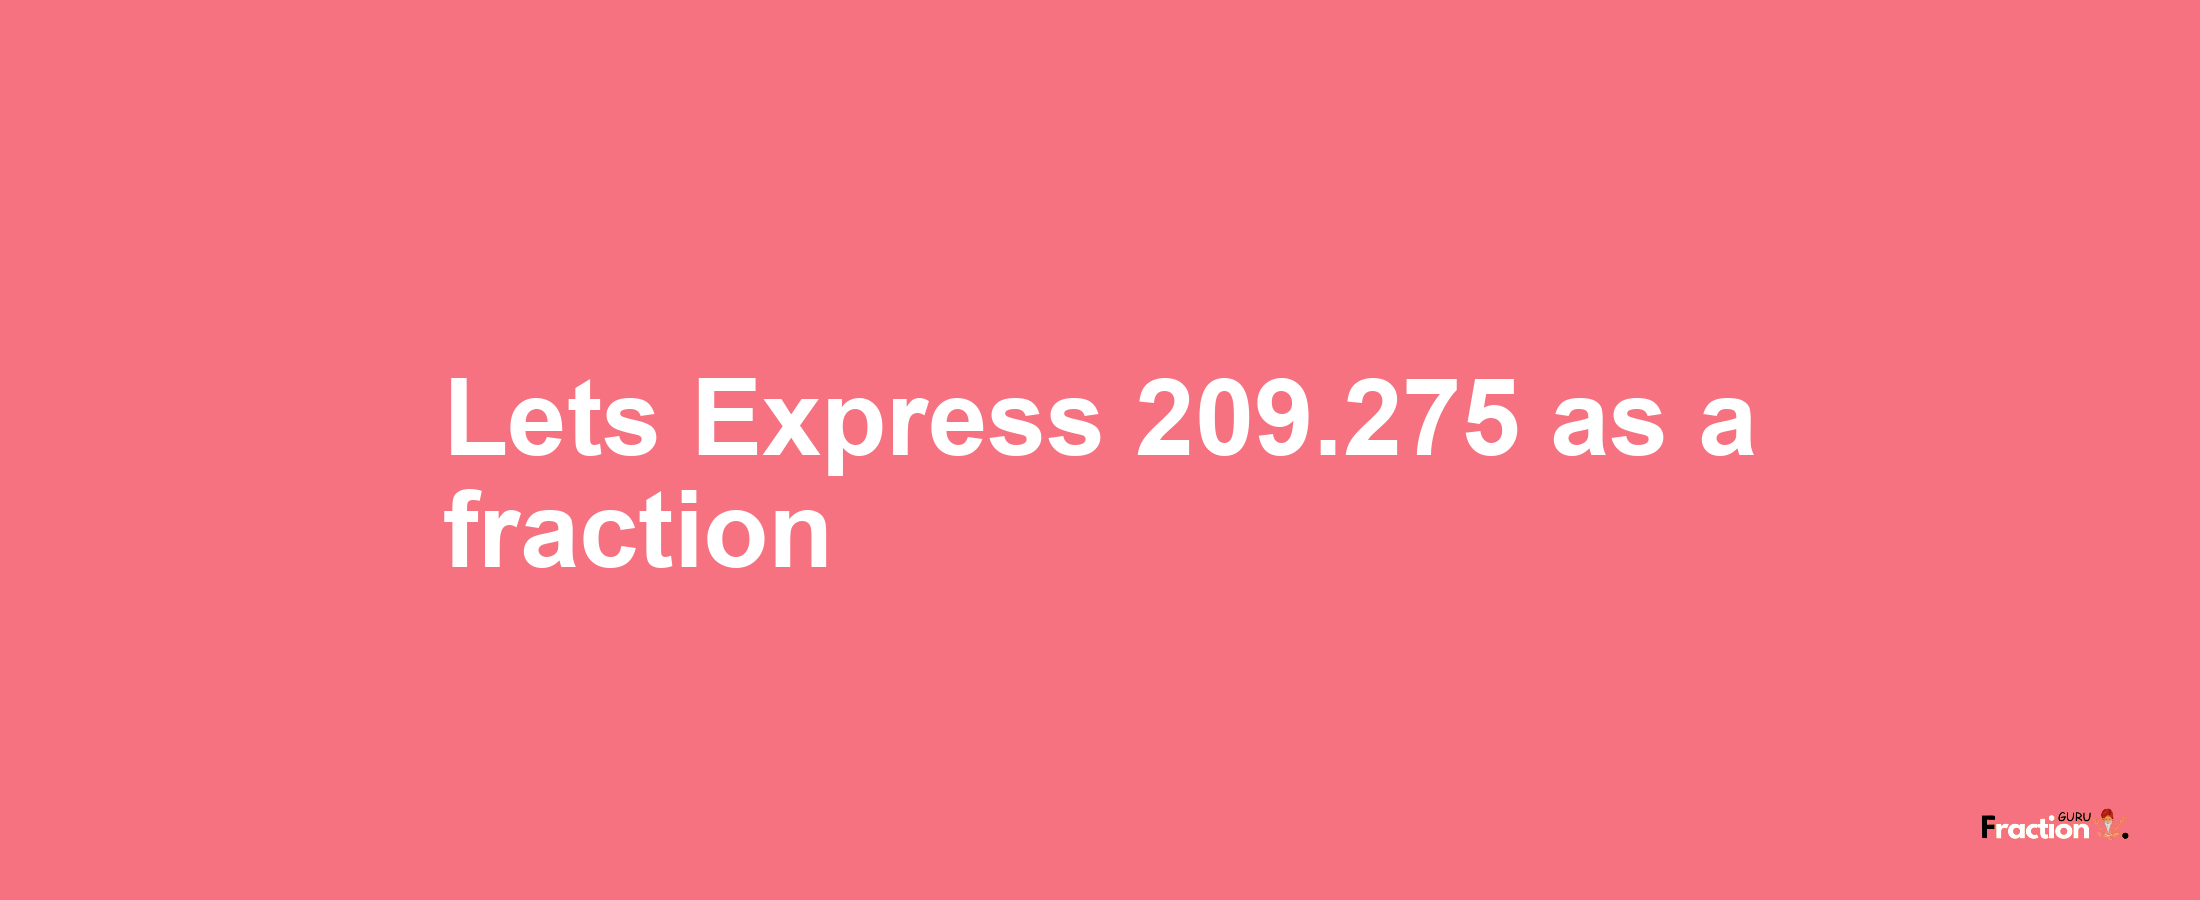 Lets Express 209.275 as afraction